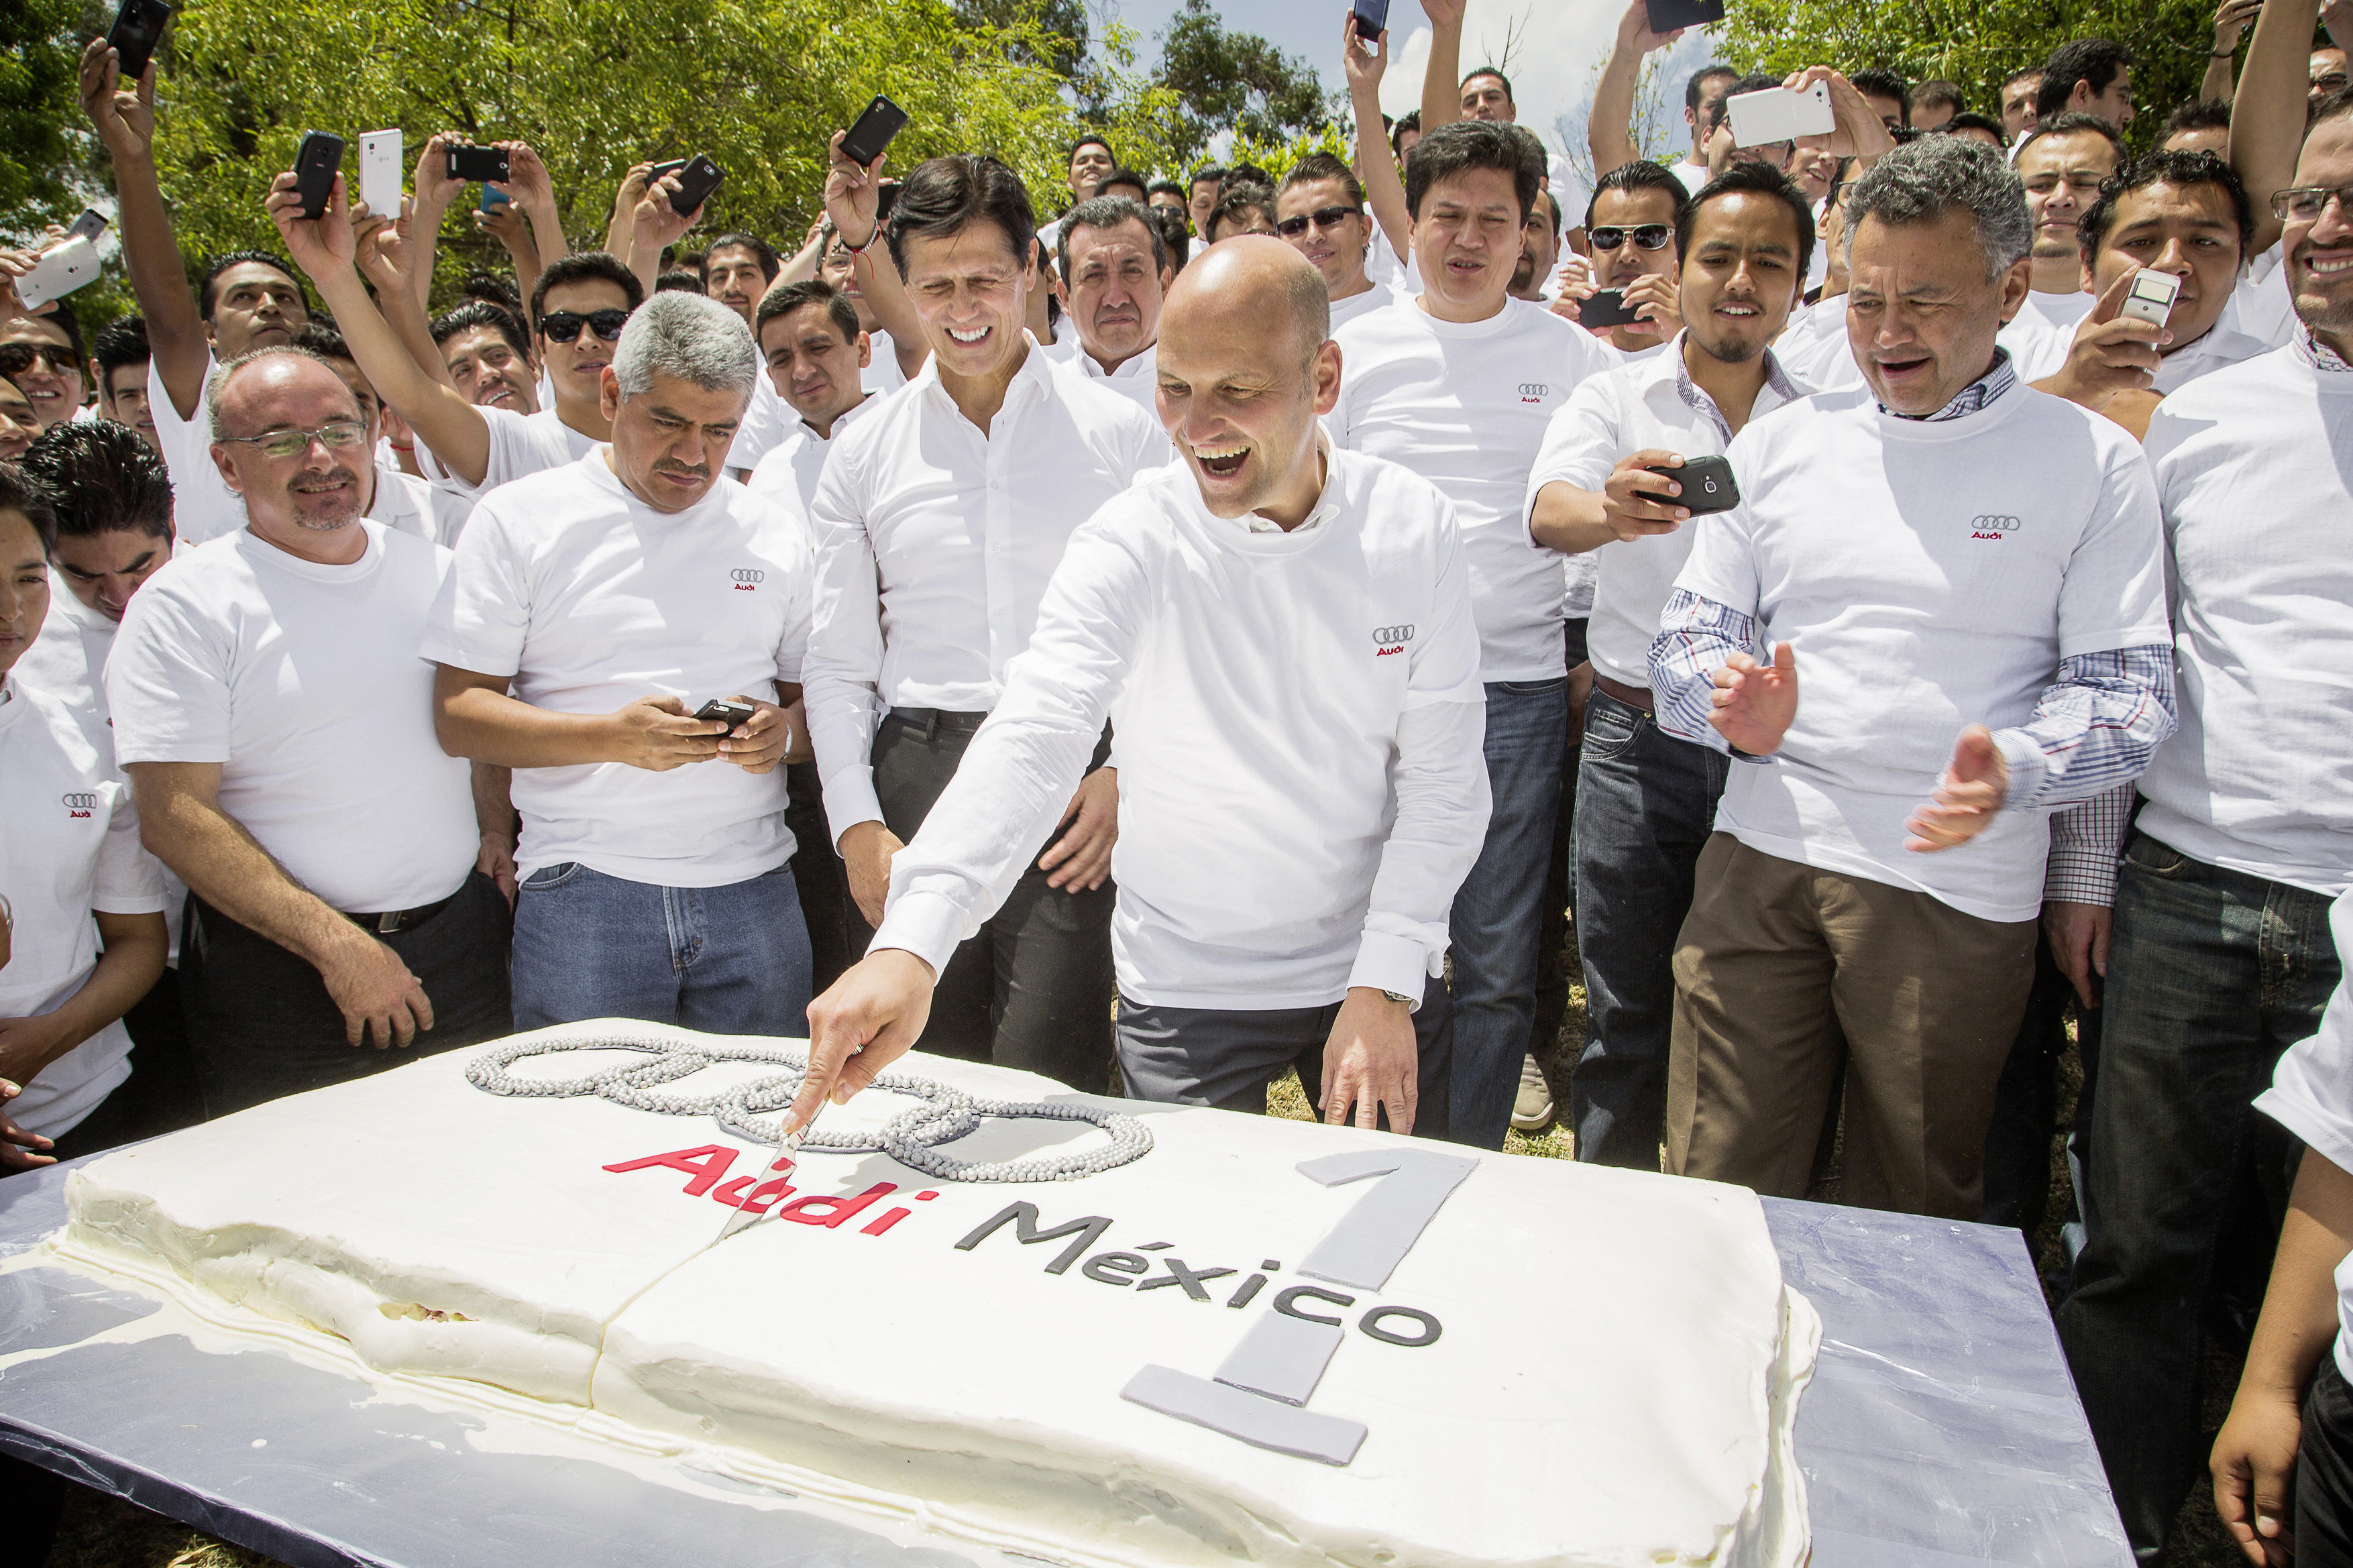 One year of Audi México: Superb results achieved